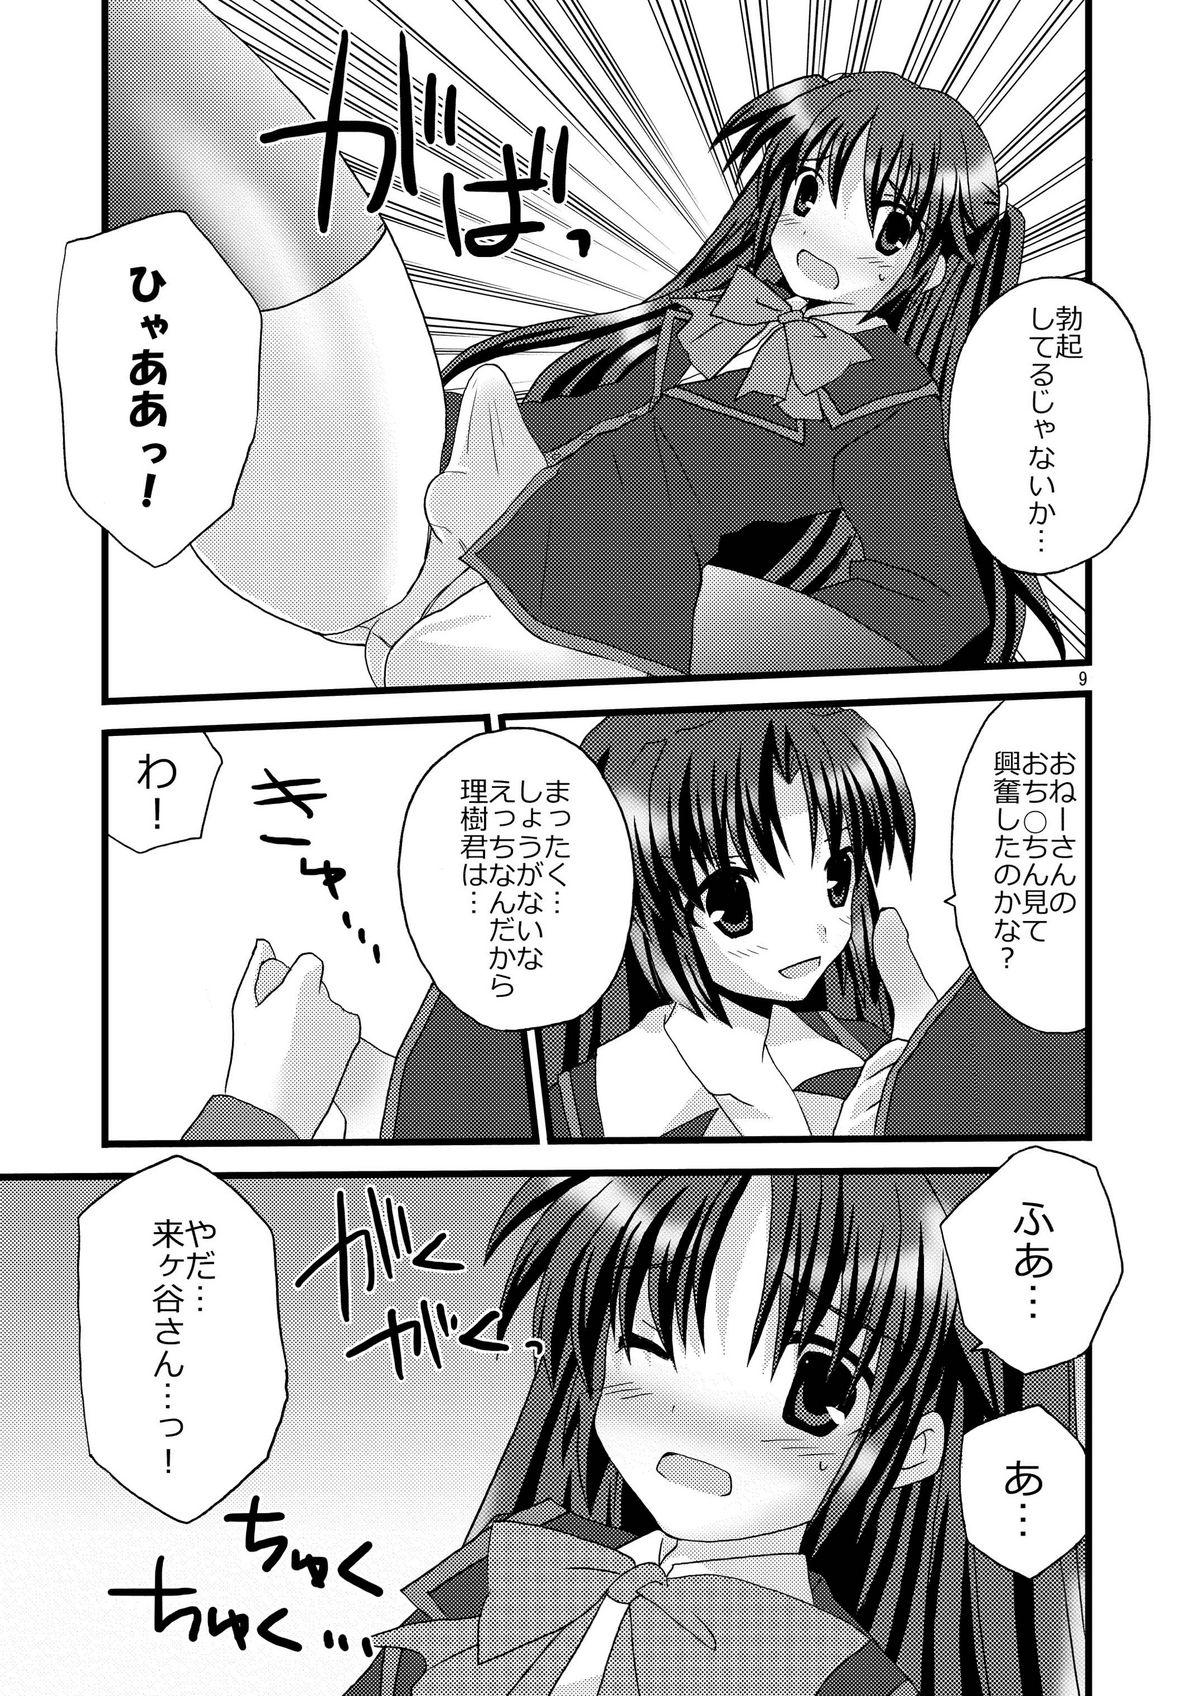 Egypt Futabasu! - Little busters Toes - Page 9